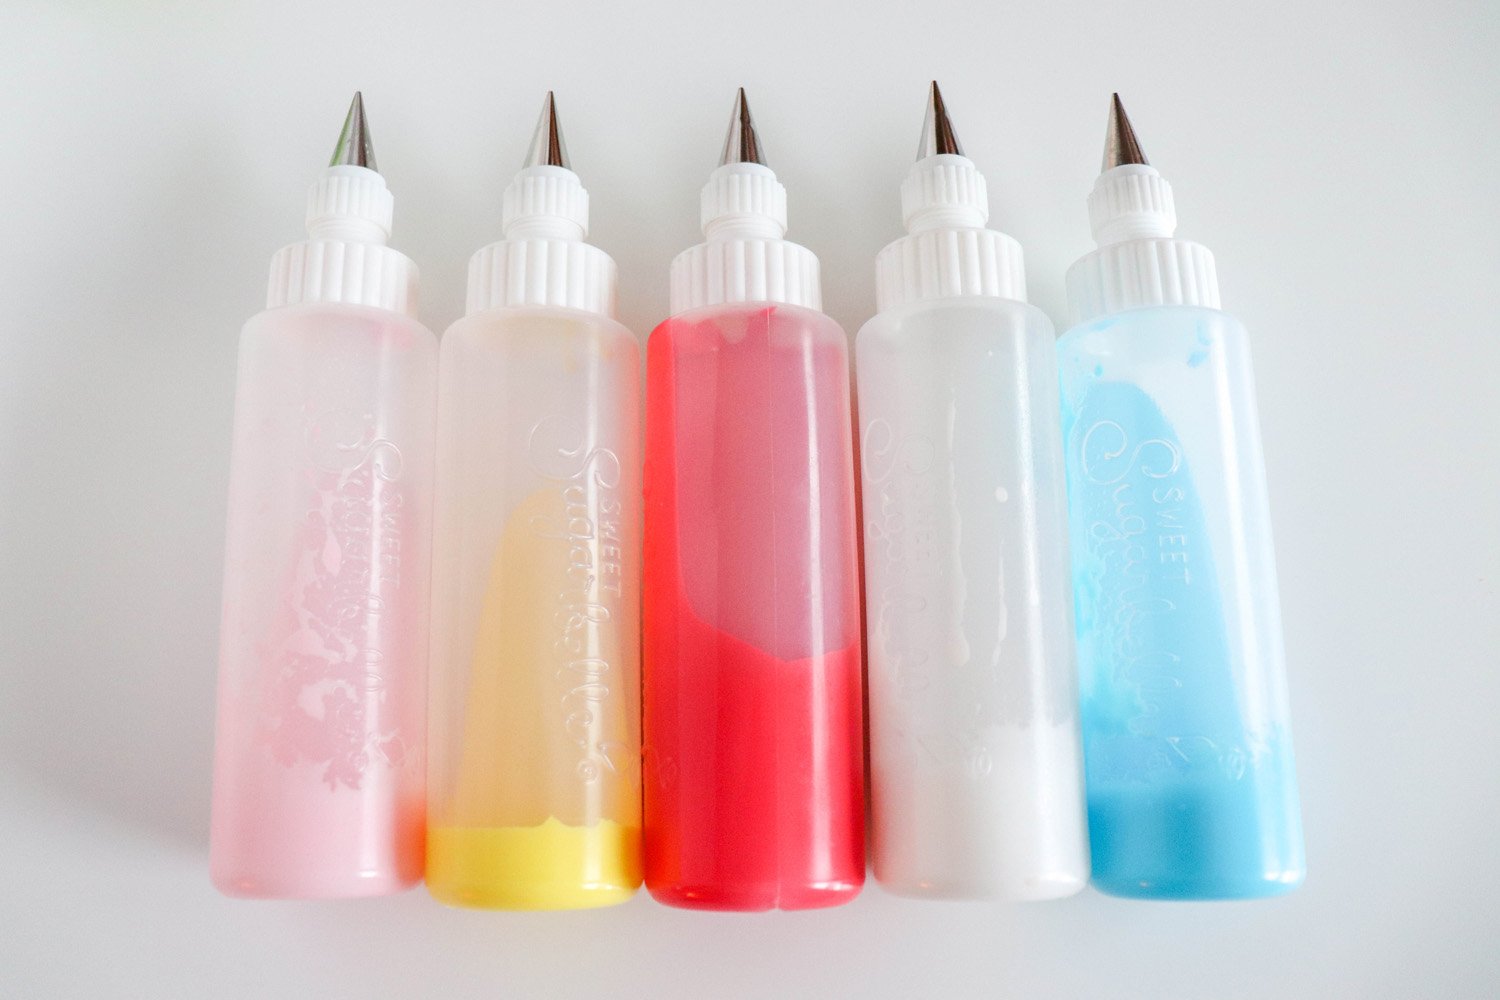 icing bottles filled with various colors